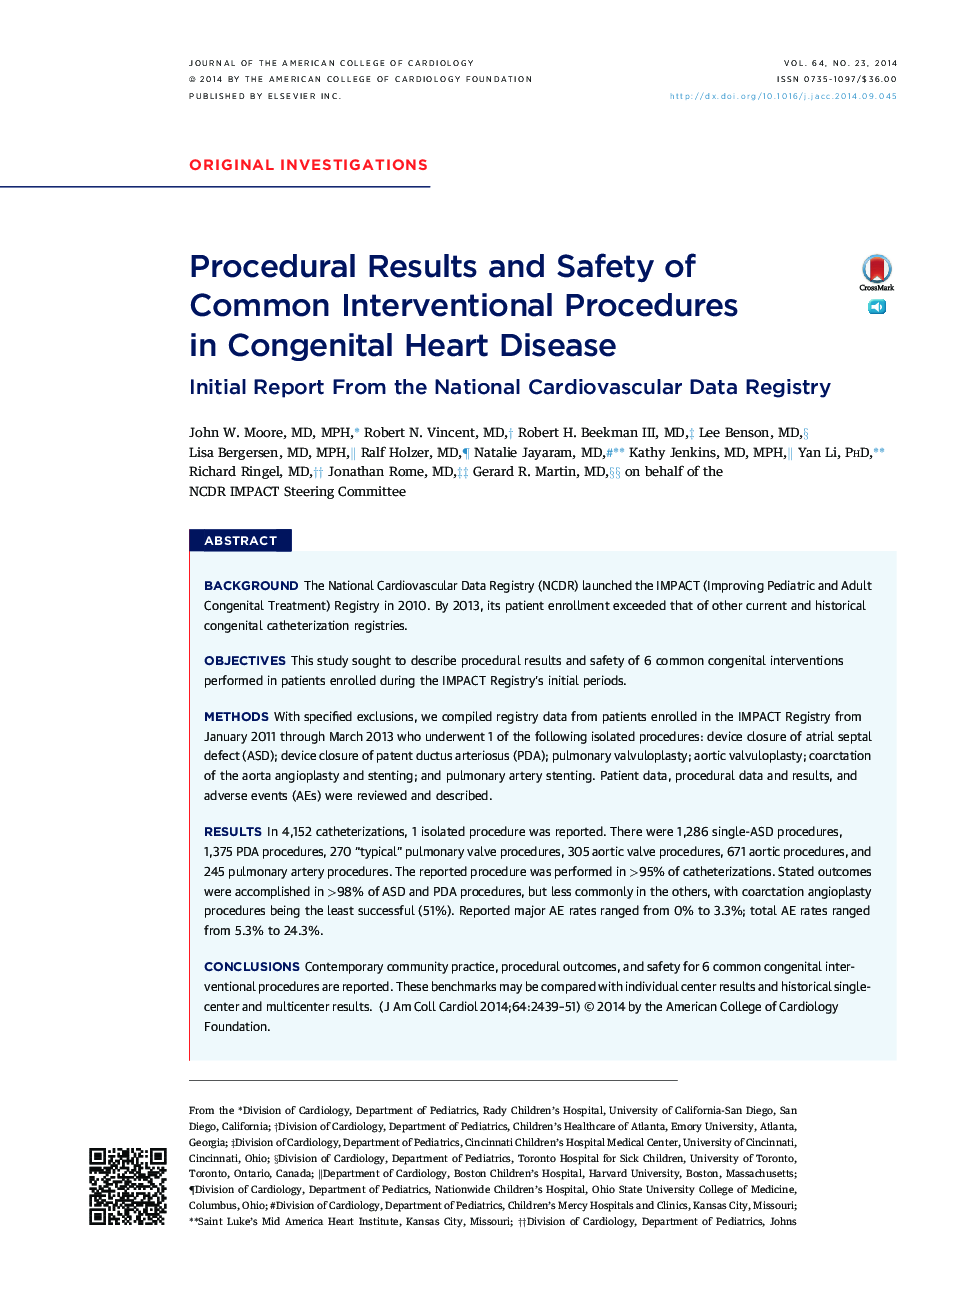 Procedural Results and Safety of Common Interventional Procedures in Congenital Heart Disease : Initial Report From the National Cardiovascular Data Registry